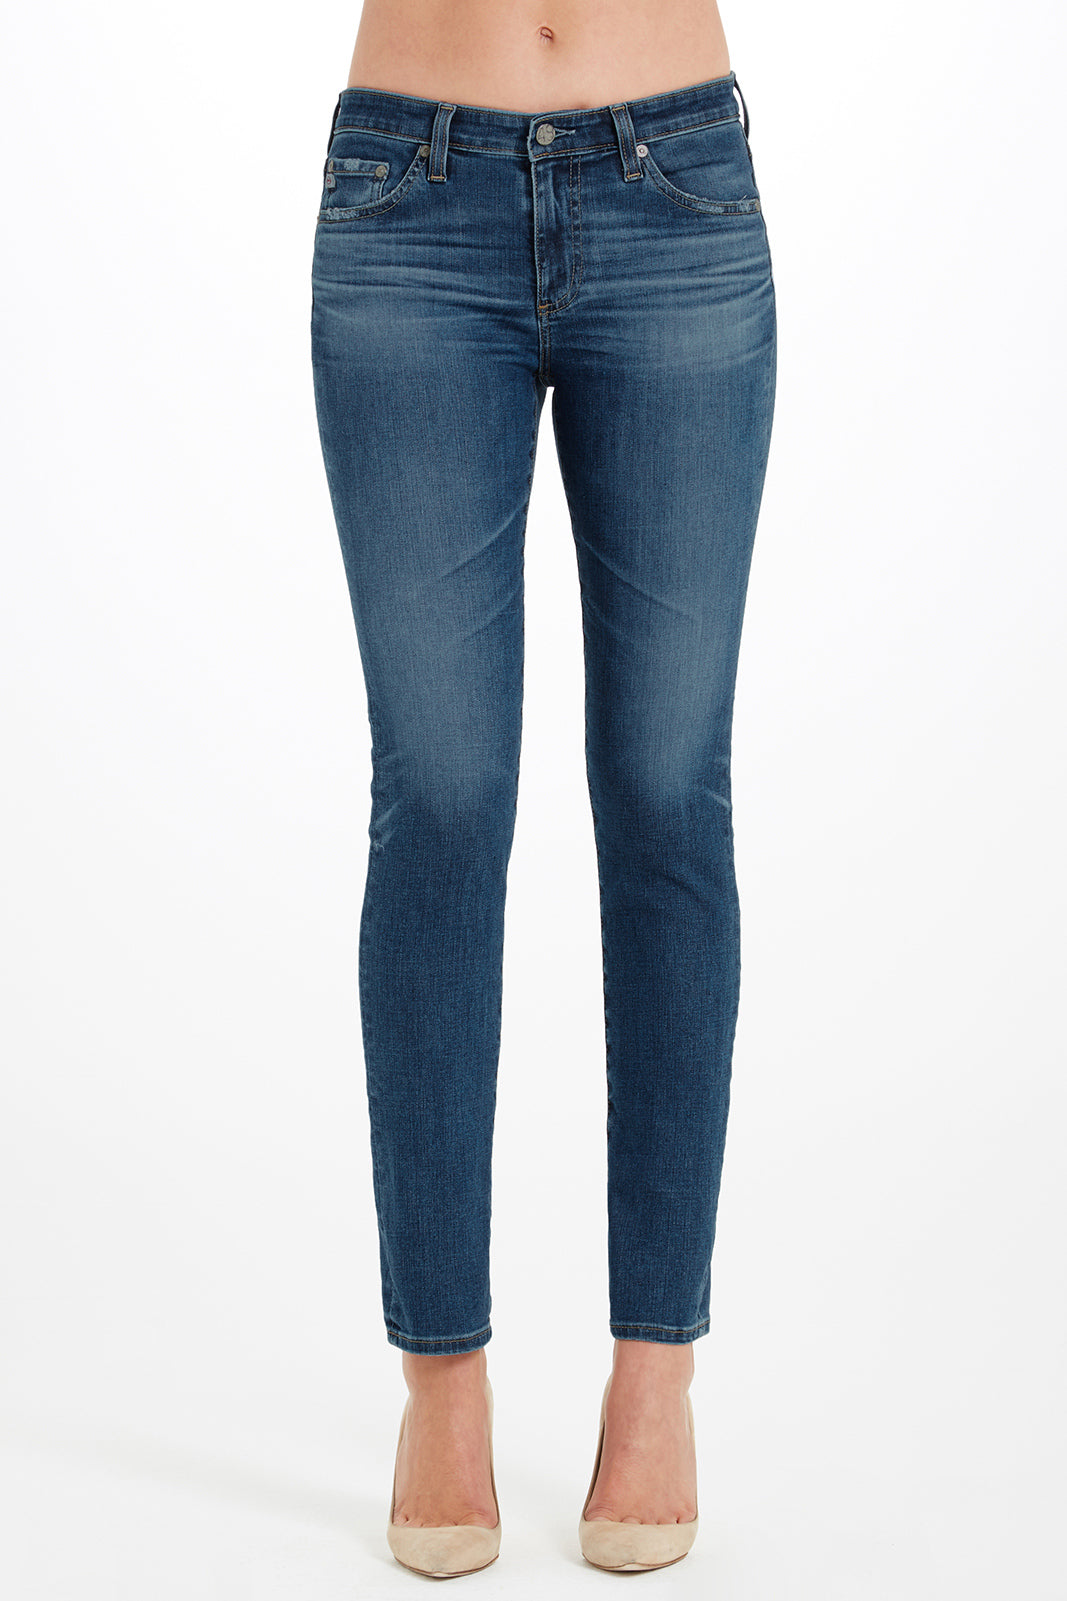 AG - The Prima Cigarette Cut Jeans in 14 Years Blue Nile